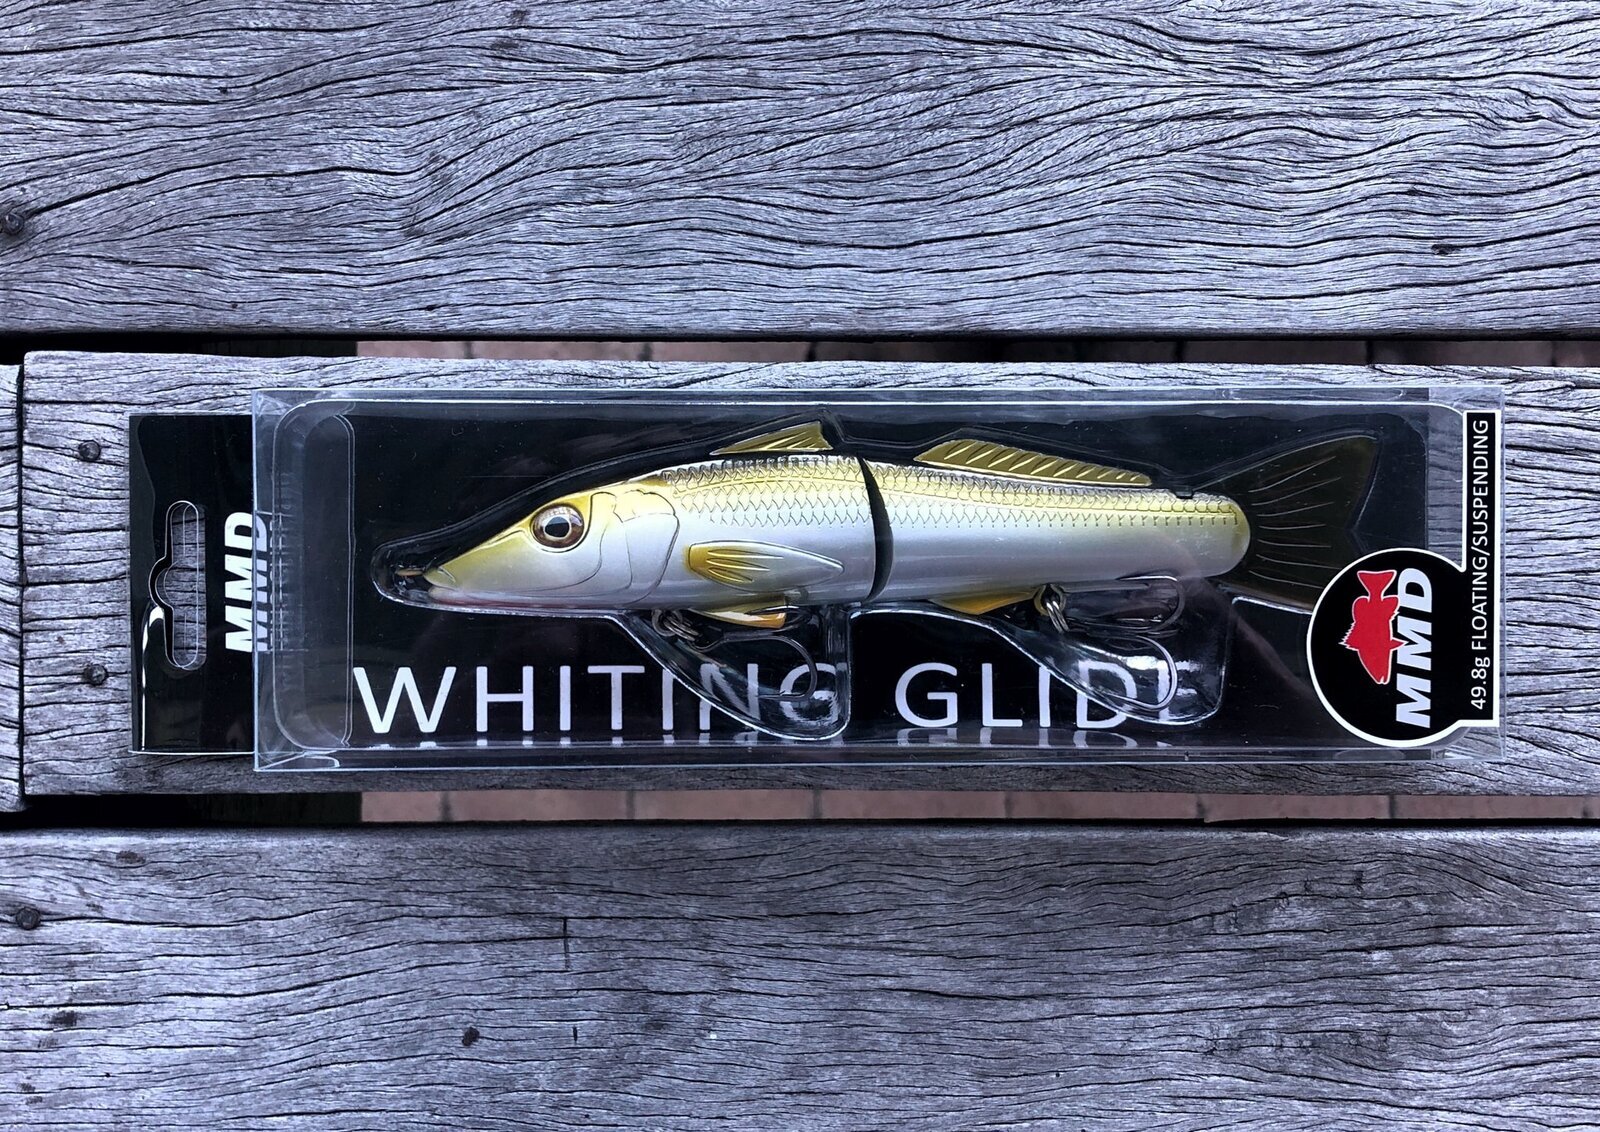 MMD Whiting 180mm Glide Bait Fishing Lure #Silver Floating